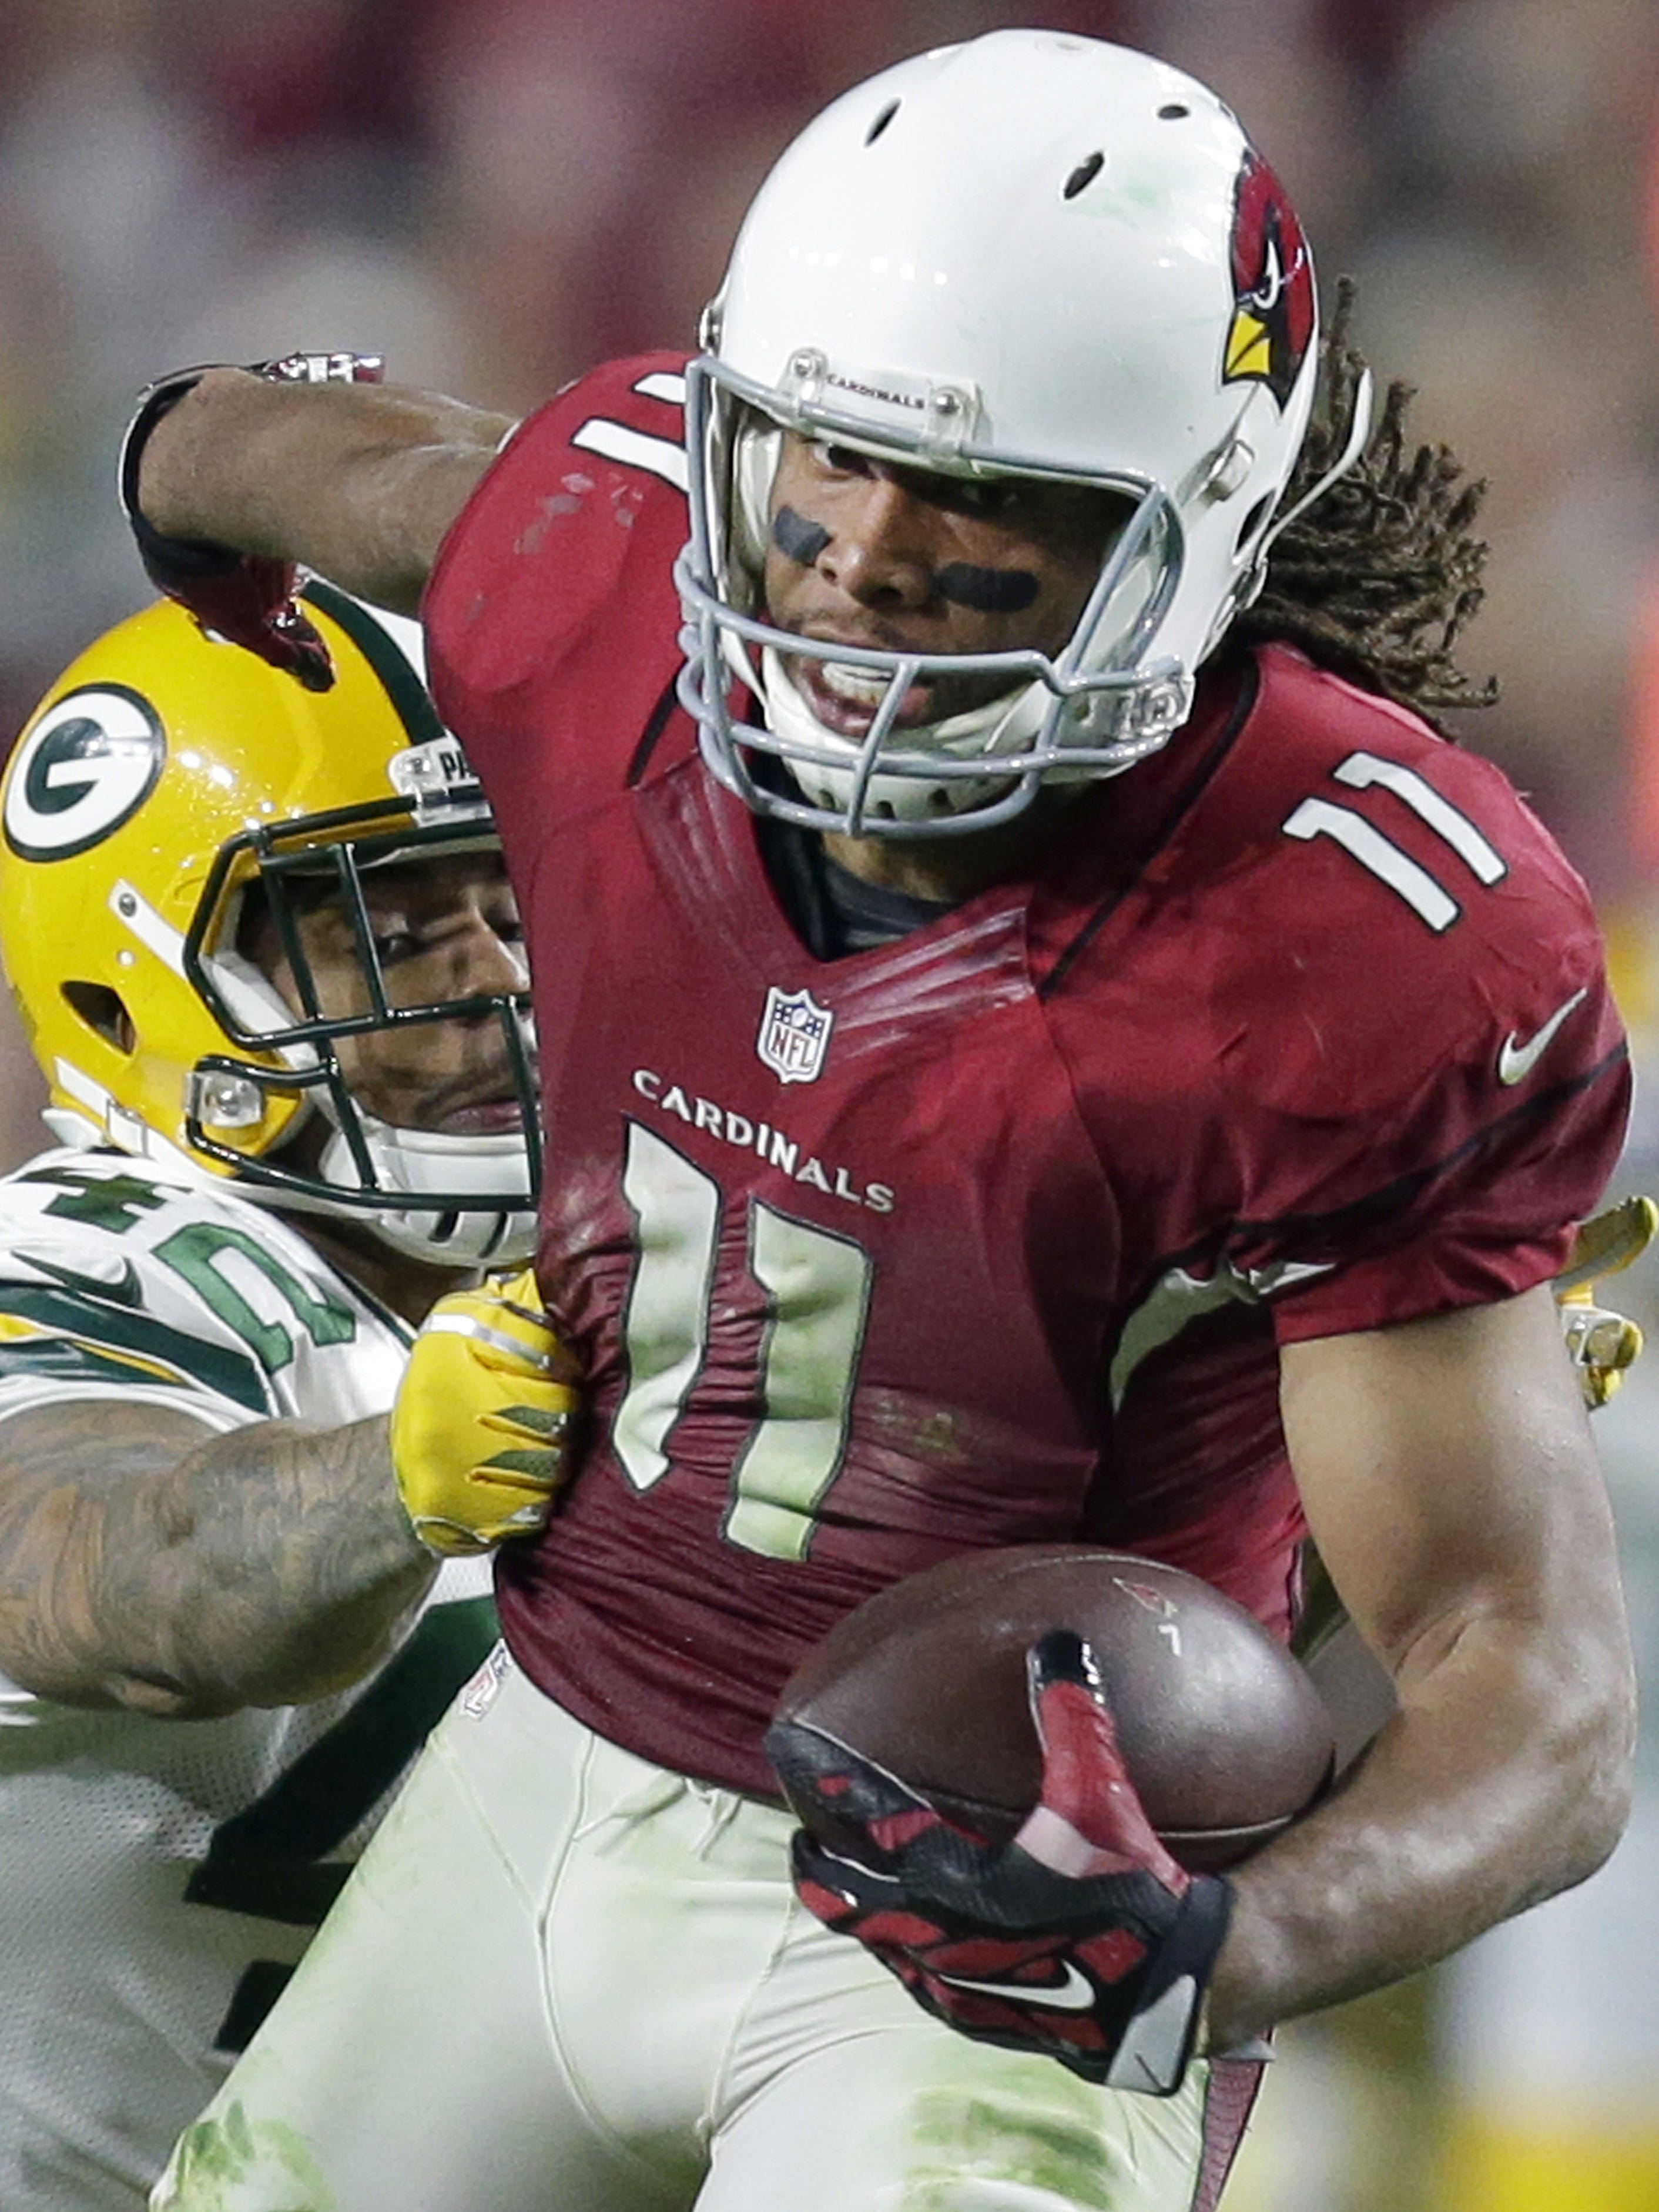 Arizona receiver Larry Fitzgerald breaks away for a 75-yard pass play in overtime to set up the Cardinals for a winning touchdown in a 2015 playoff games against the Packers.